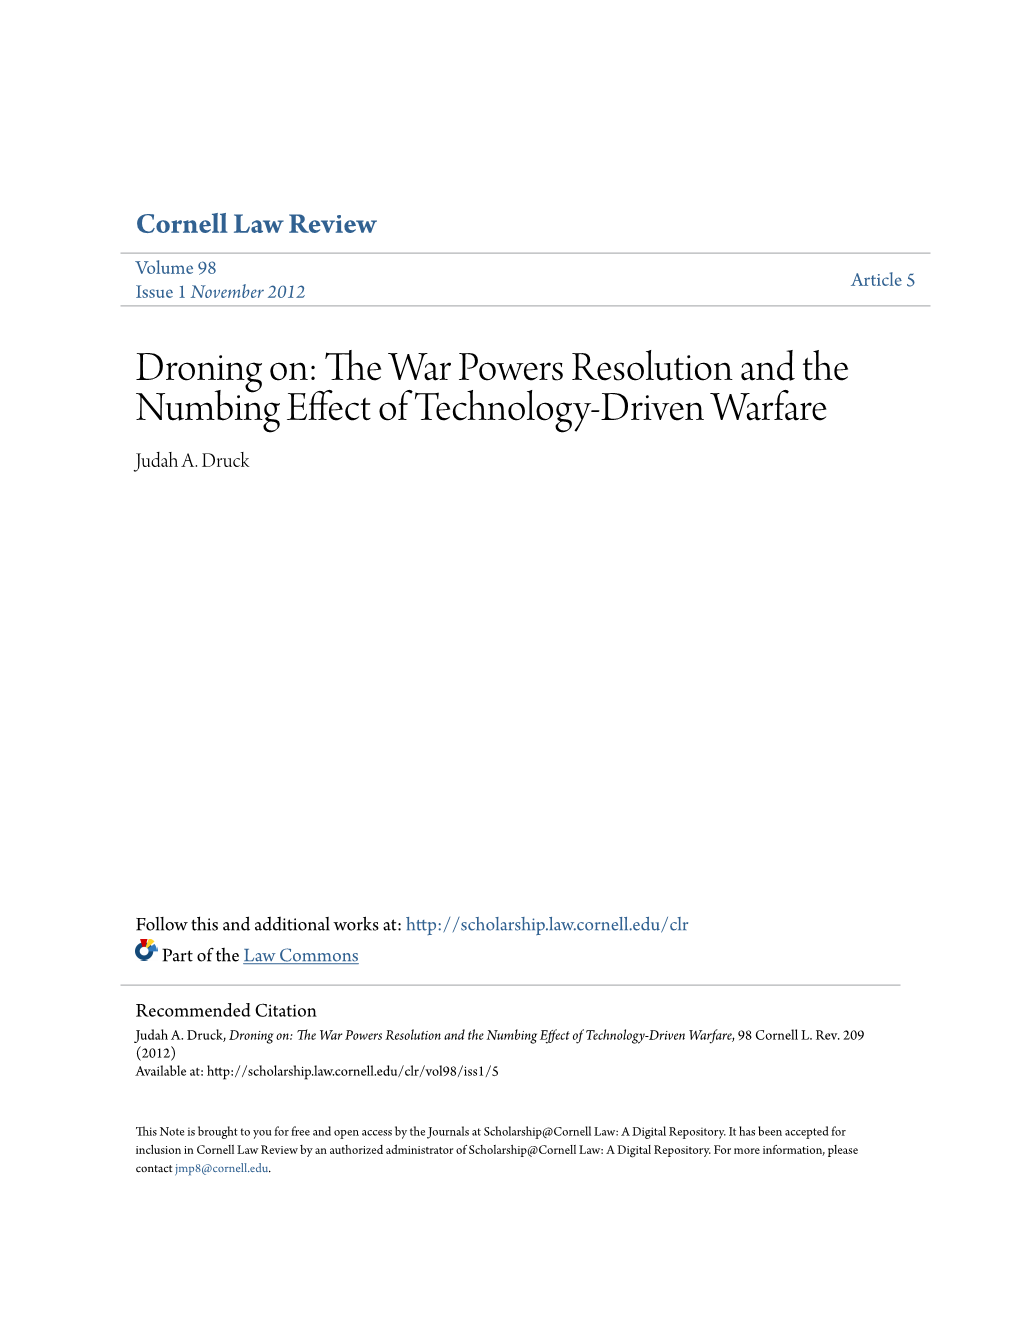 Droning On: the War Powers Resolution and the Numbing Effect of Technology-Driven Warfare, 98 Cornell L